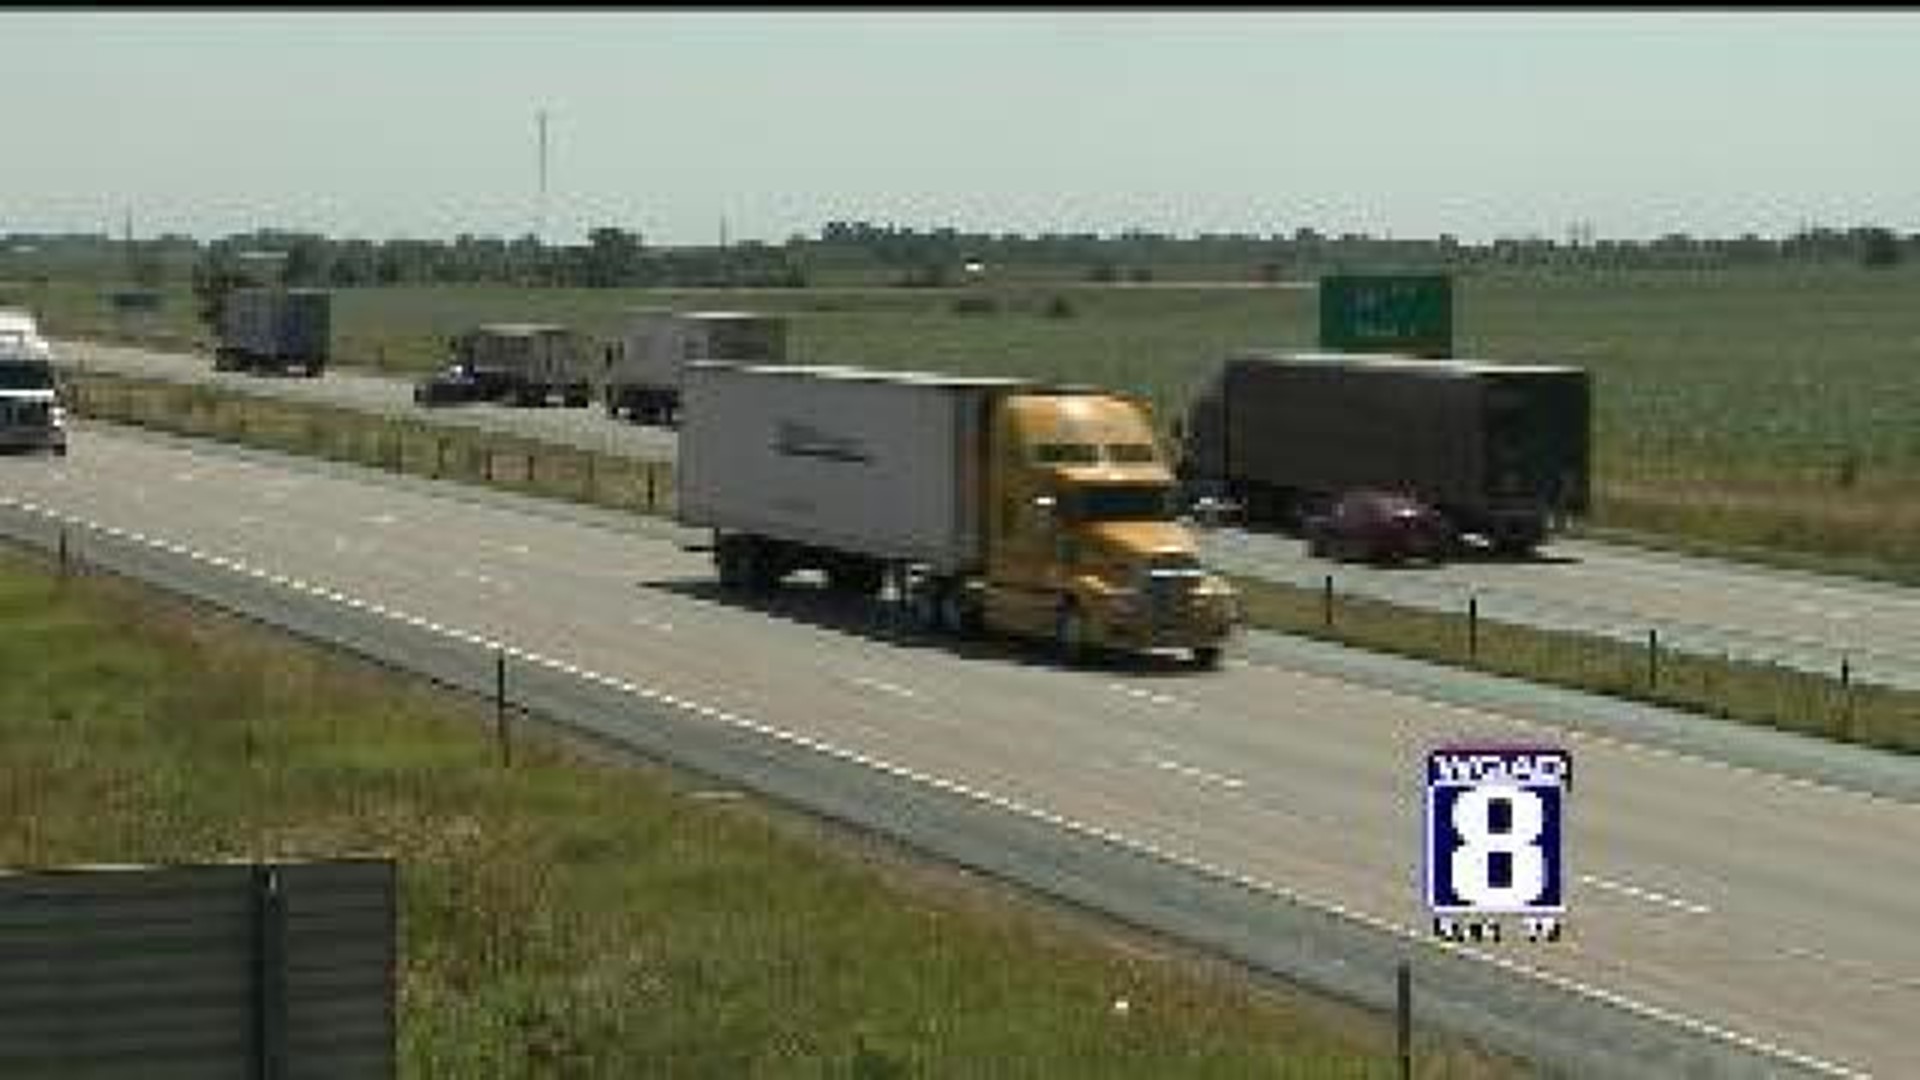 Police attempt to prevent fatalities on I-80